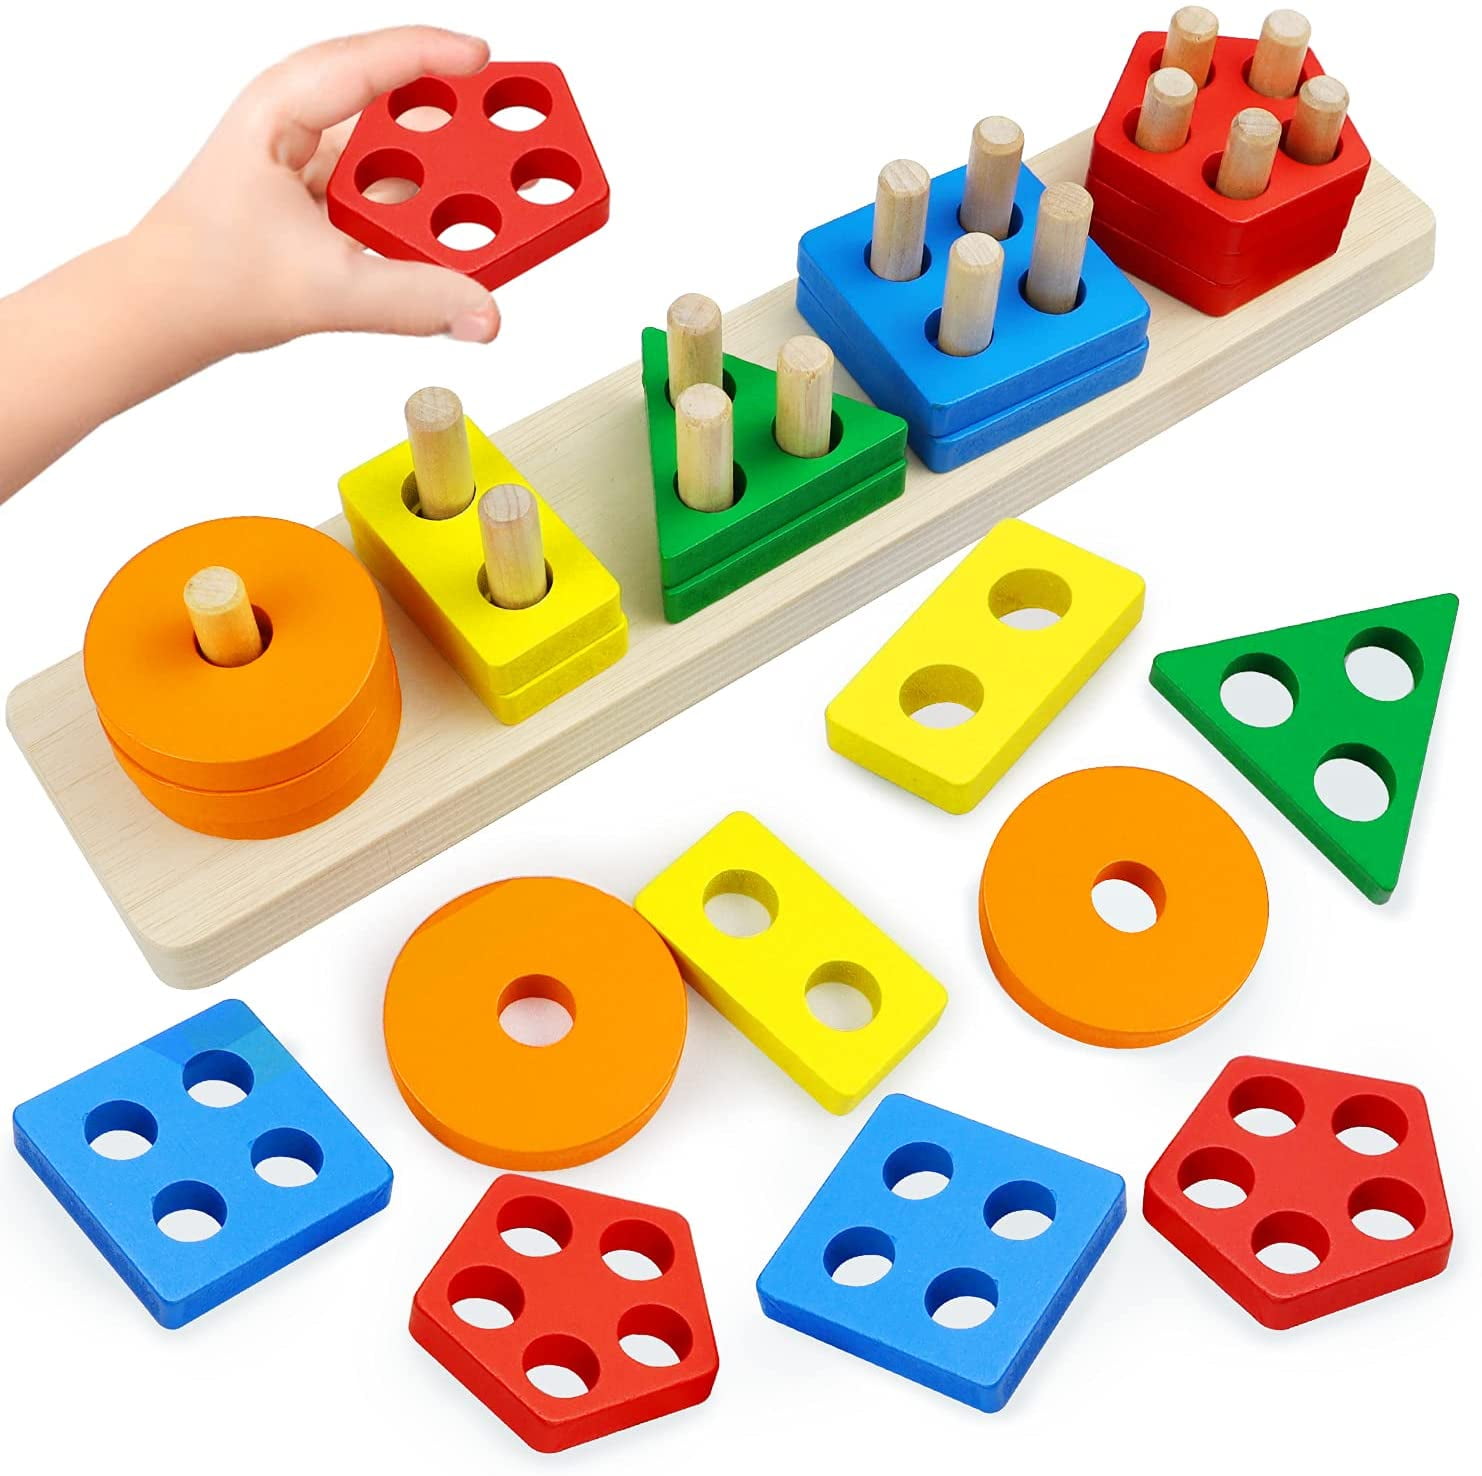 Geometric Shapes Stacking Blocks Early  Educational learning toys kids Toddlers 